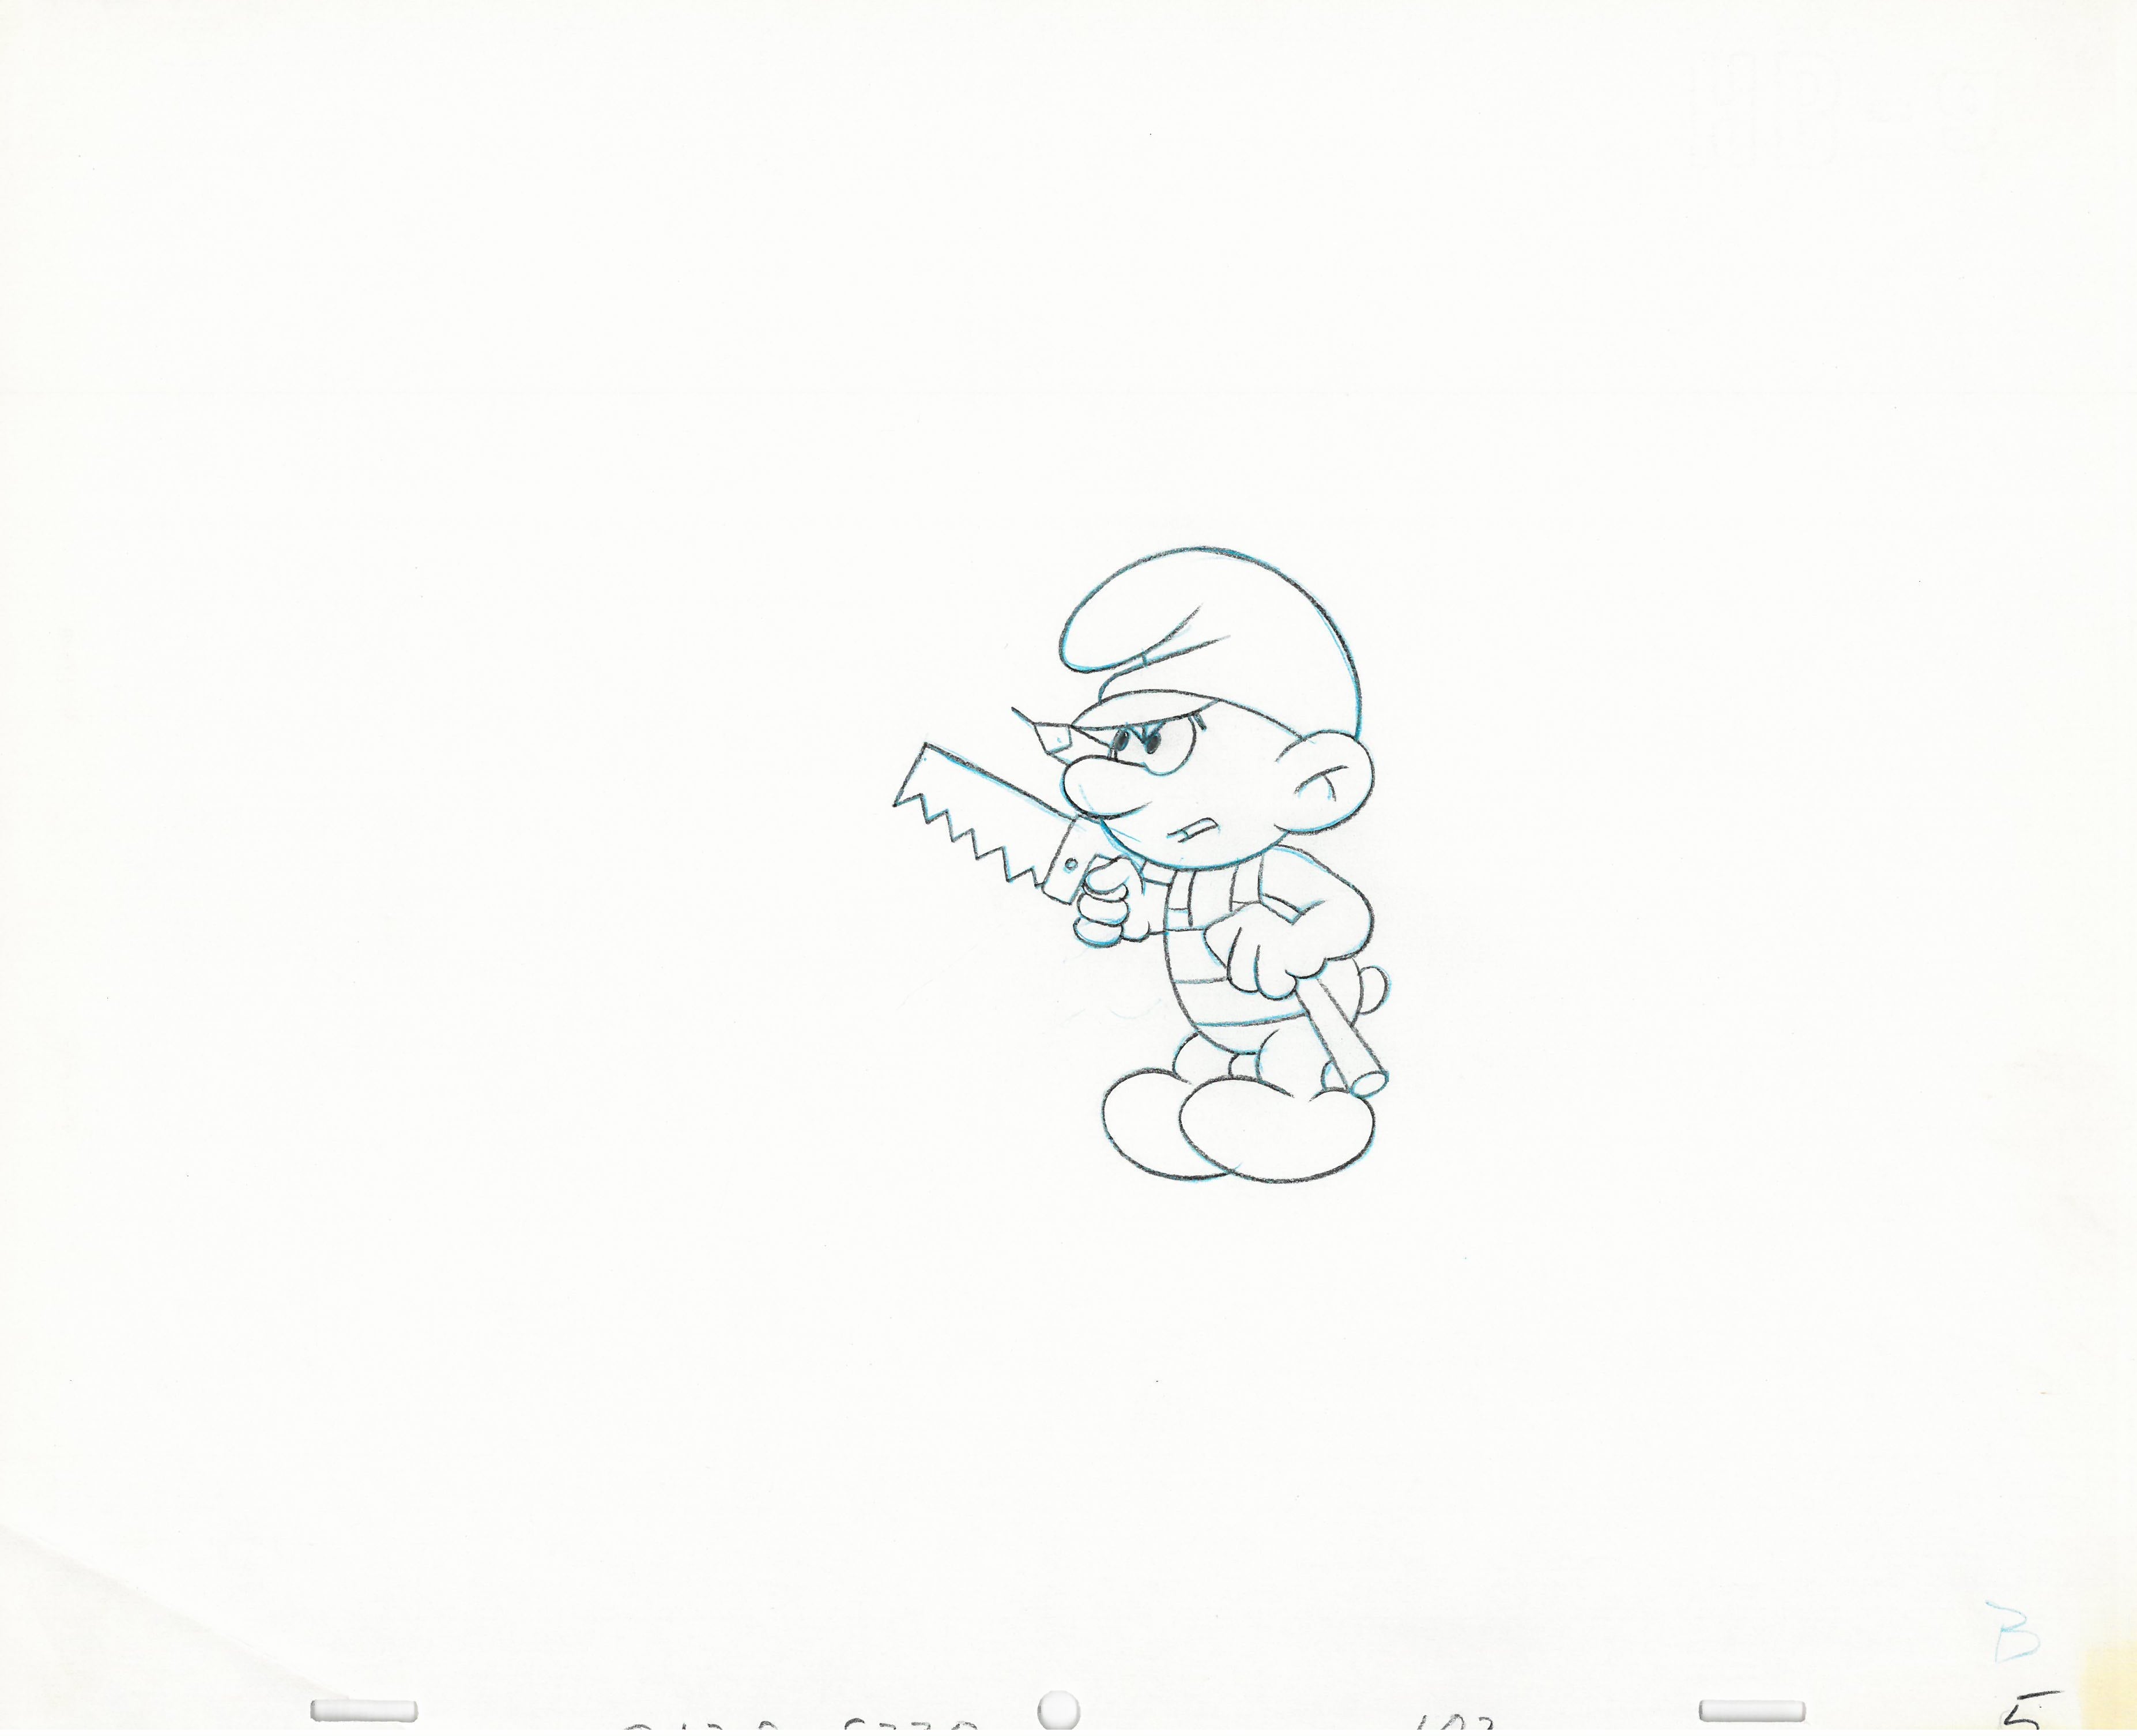 1958: What does the Word “Smurf” Actually Mean?